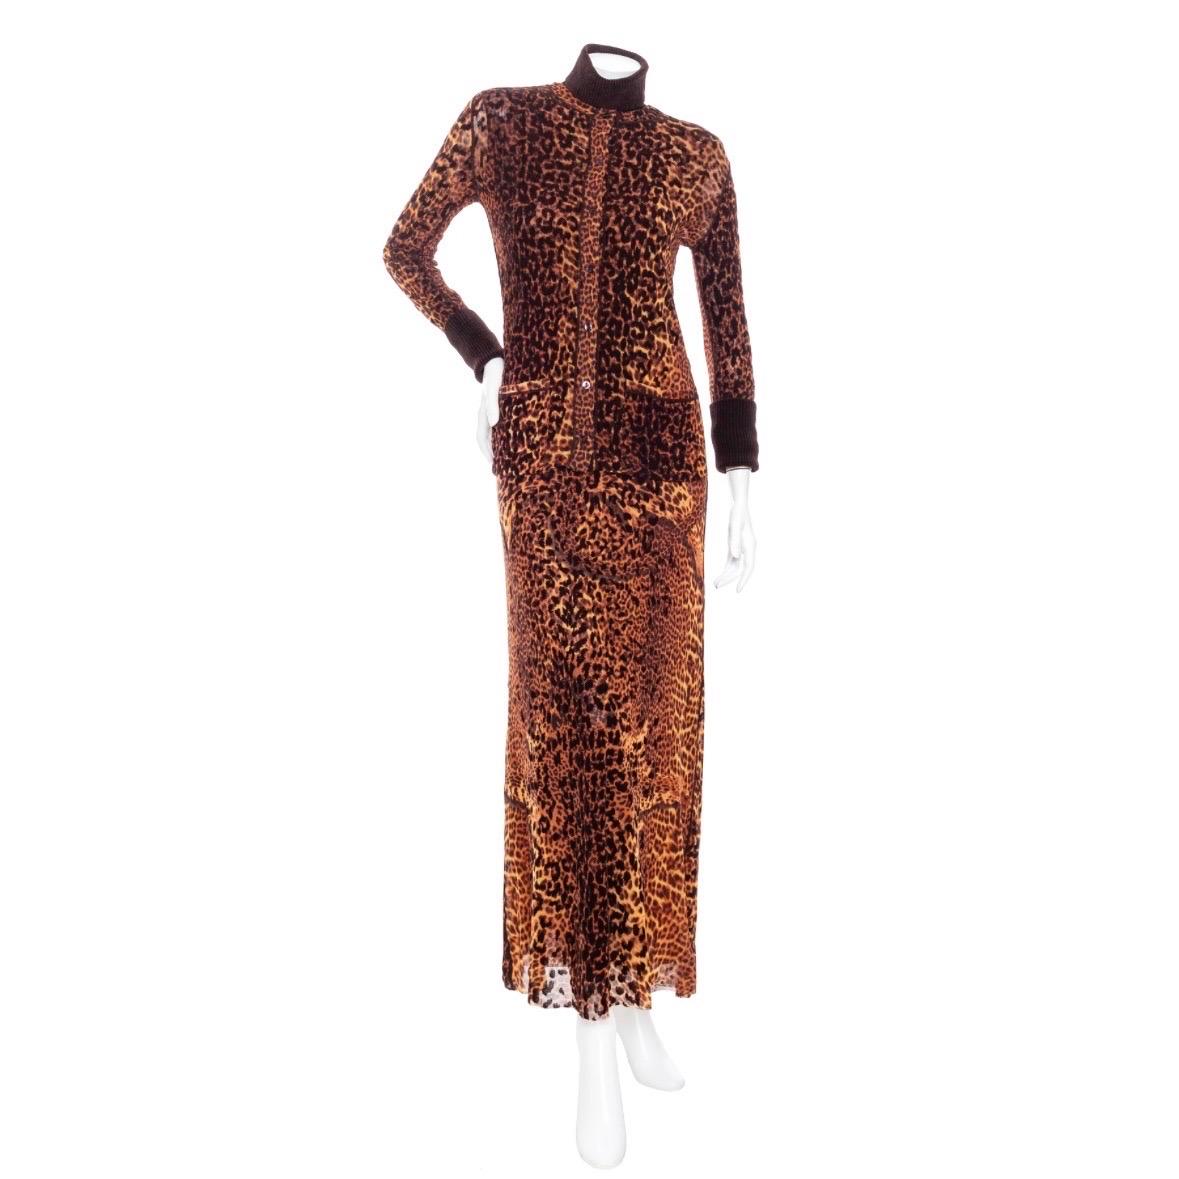 Jean Paul Gaultier 1990s Maille Femme Brown Mesh Leopard Two-Piece Dress and Cardigan Set

Vintage; circa 1990s
Brown/Orange/Black
Two-piece set include dress and matching cardigan
Dress features a ribbed folded turtleneck collar, matching knit